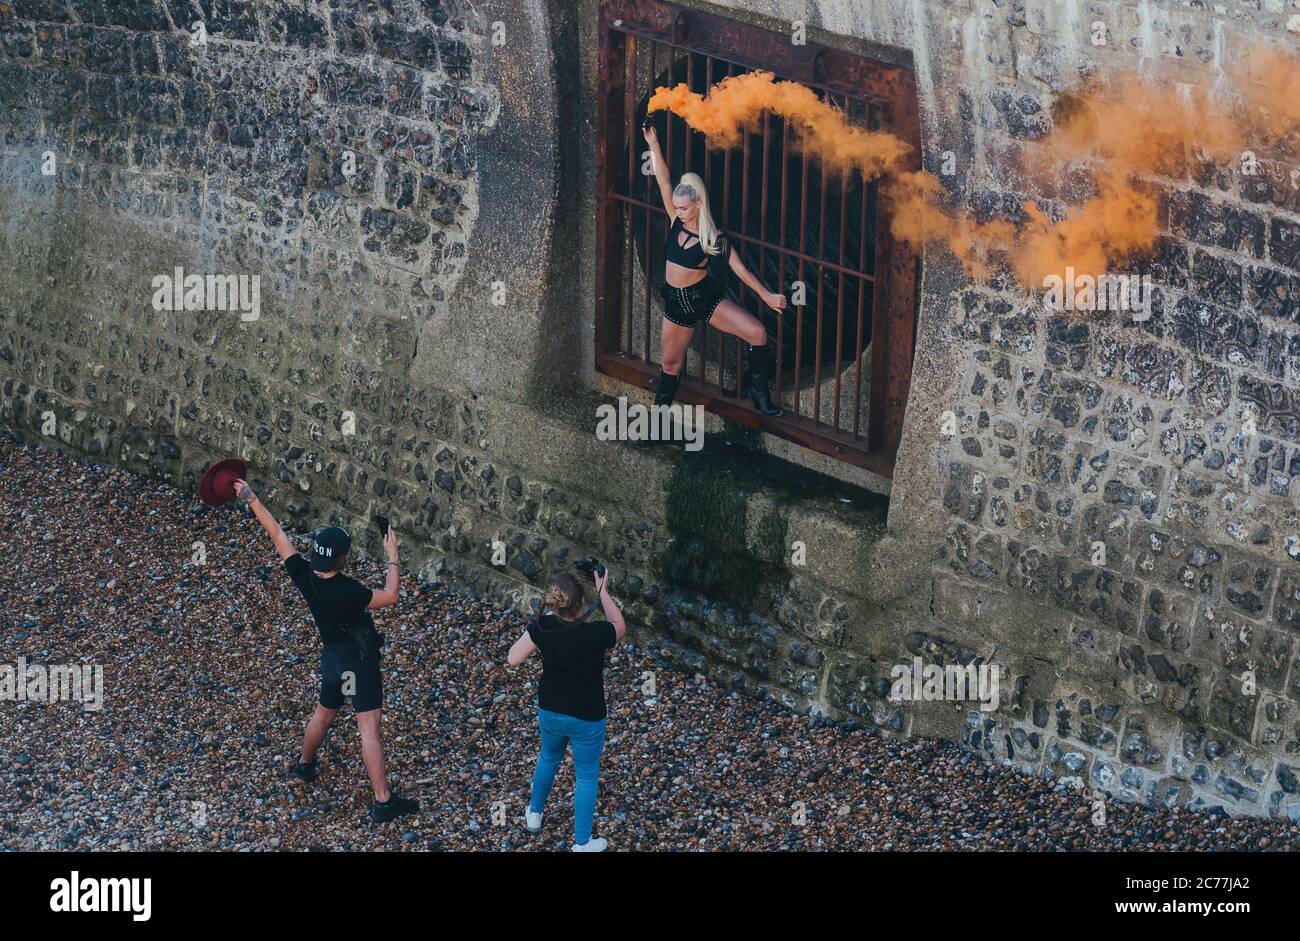 Photographer and assistant shooting a woman setting off an orange smoke bomb against an urban background Stock Photo